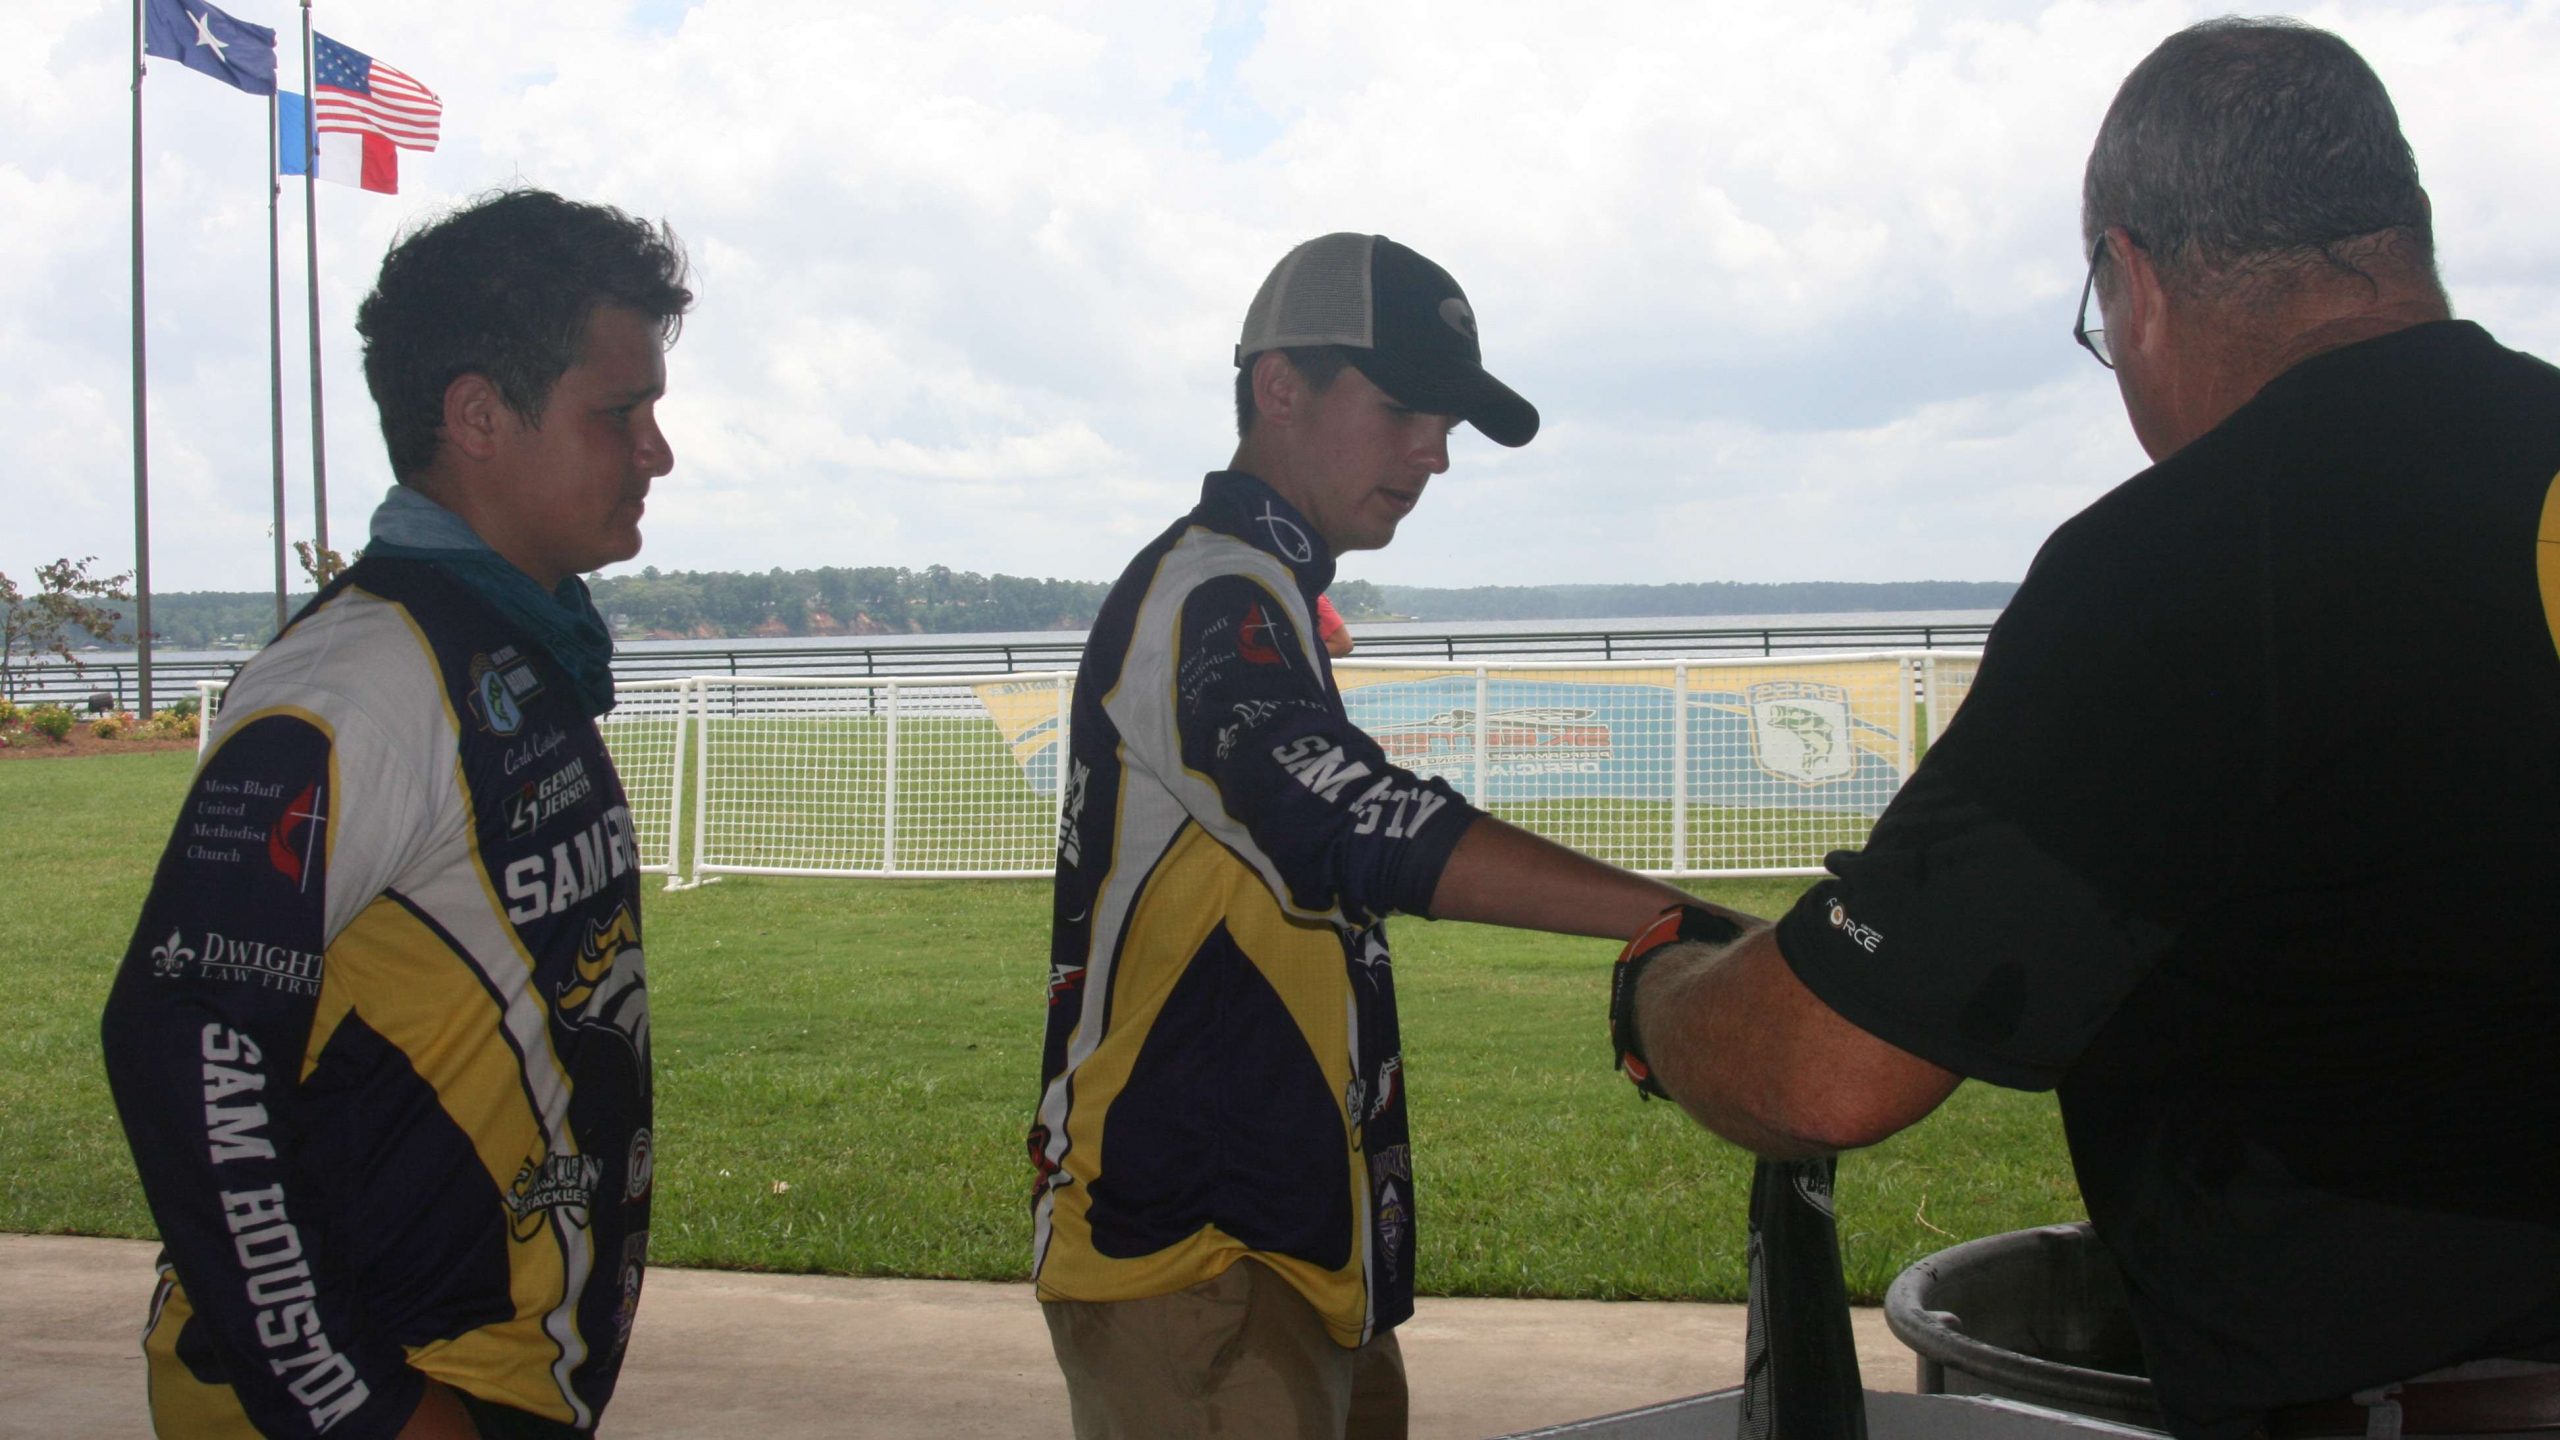 A pair of Sam Houston High School anglers present their bag to be weighed backstage.